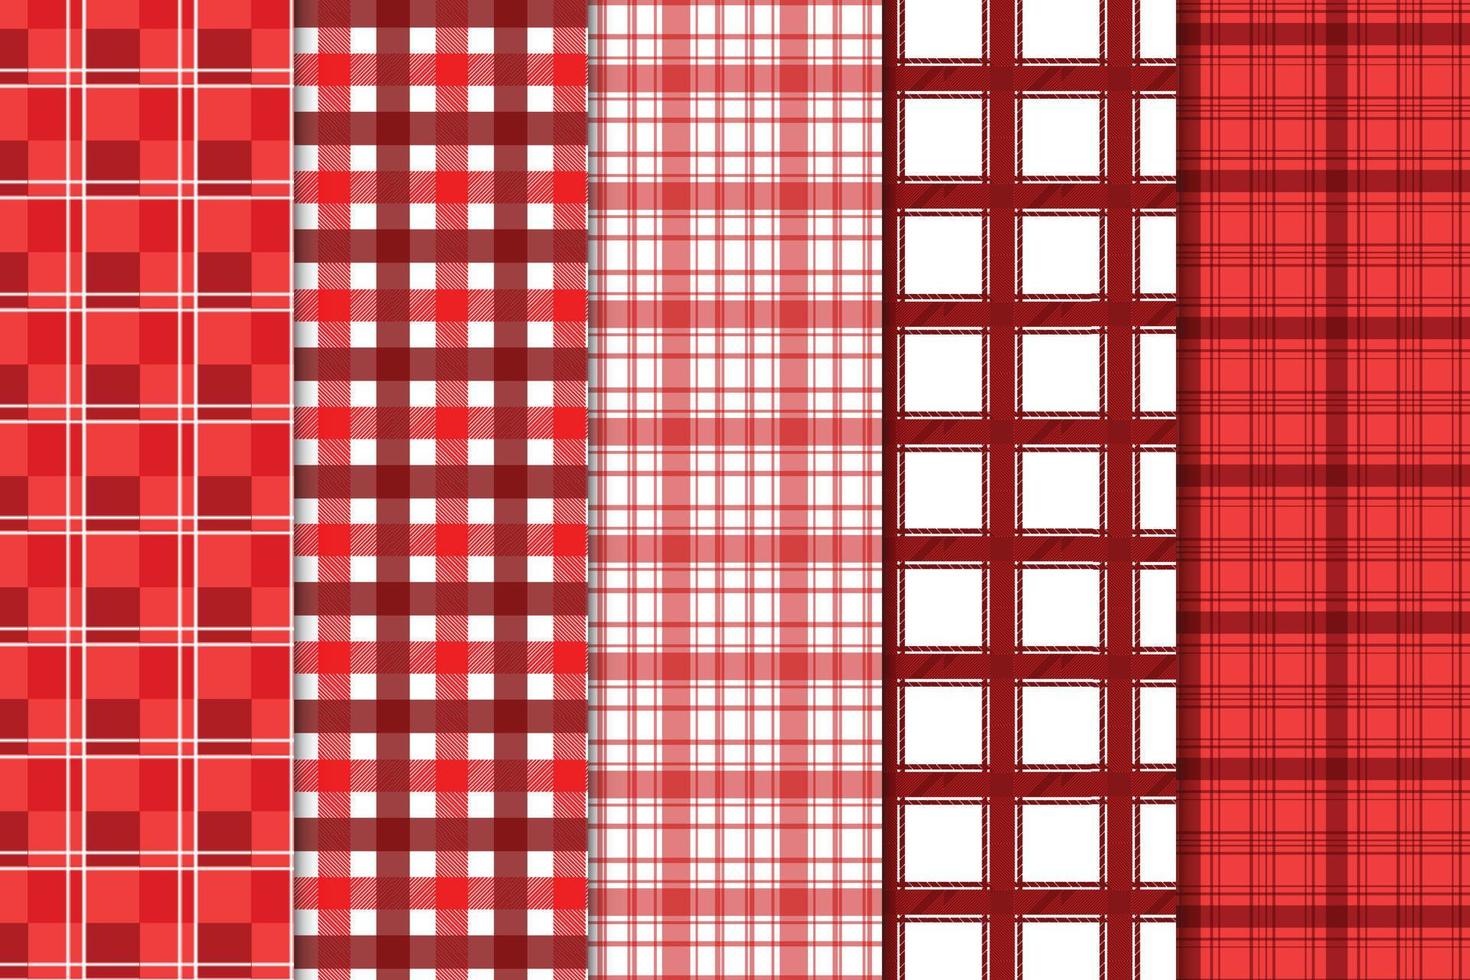 Seamless gingham plaid pattern bundle vector for fabric and t-shirt design. Endless plaid pattern collection designed with red and white colors. Plaid pattern set decoration for clothing and dress.